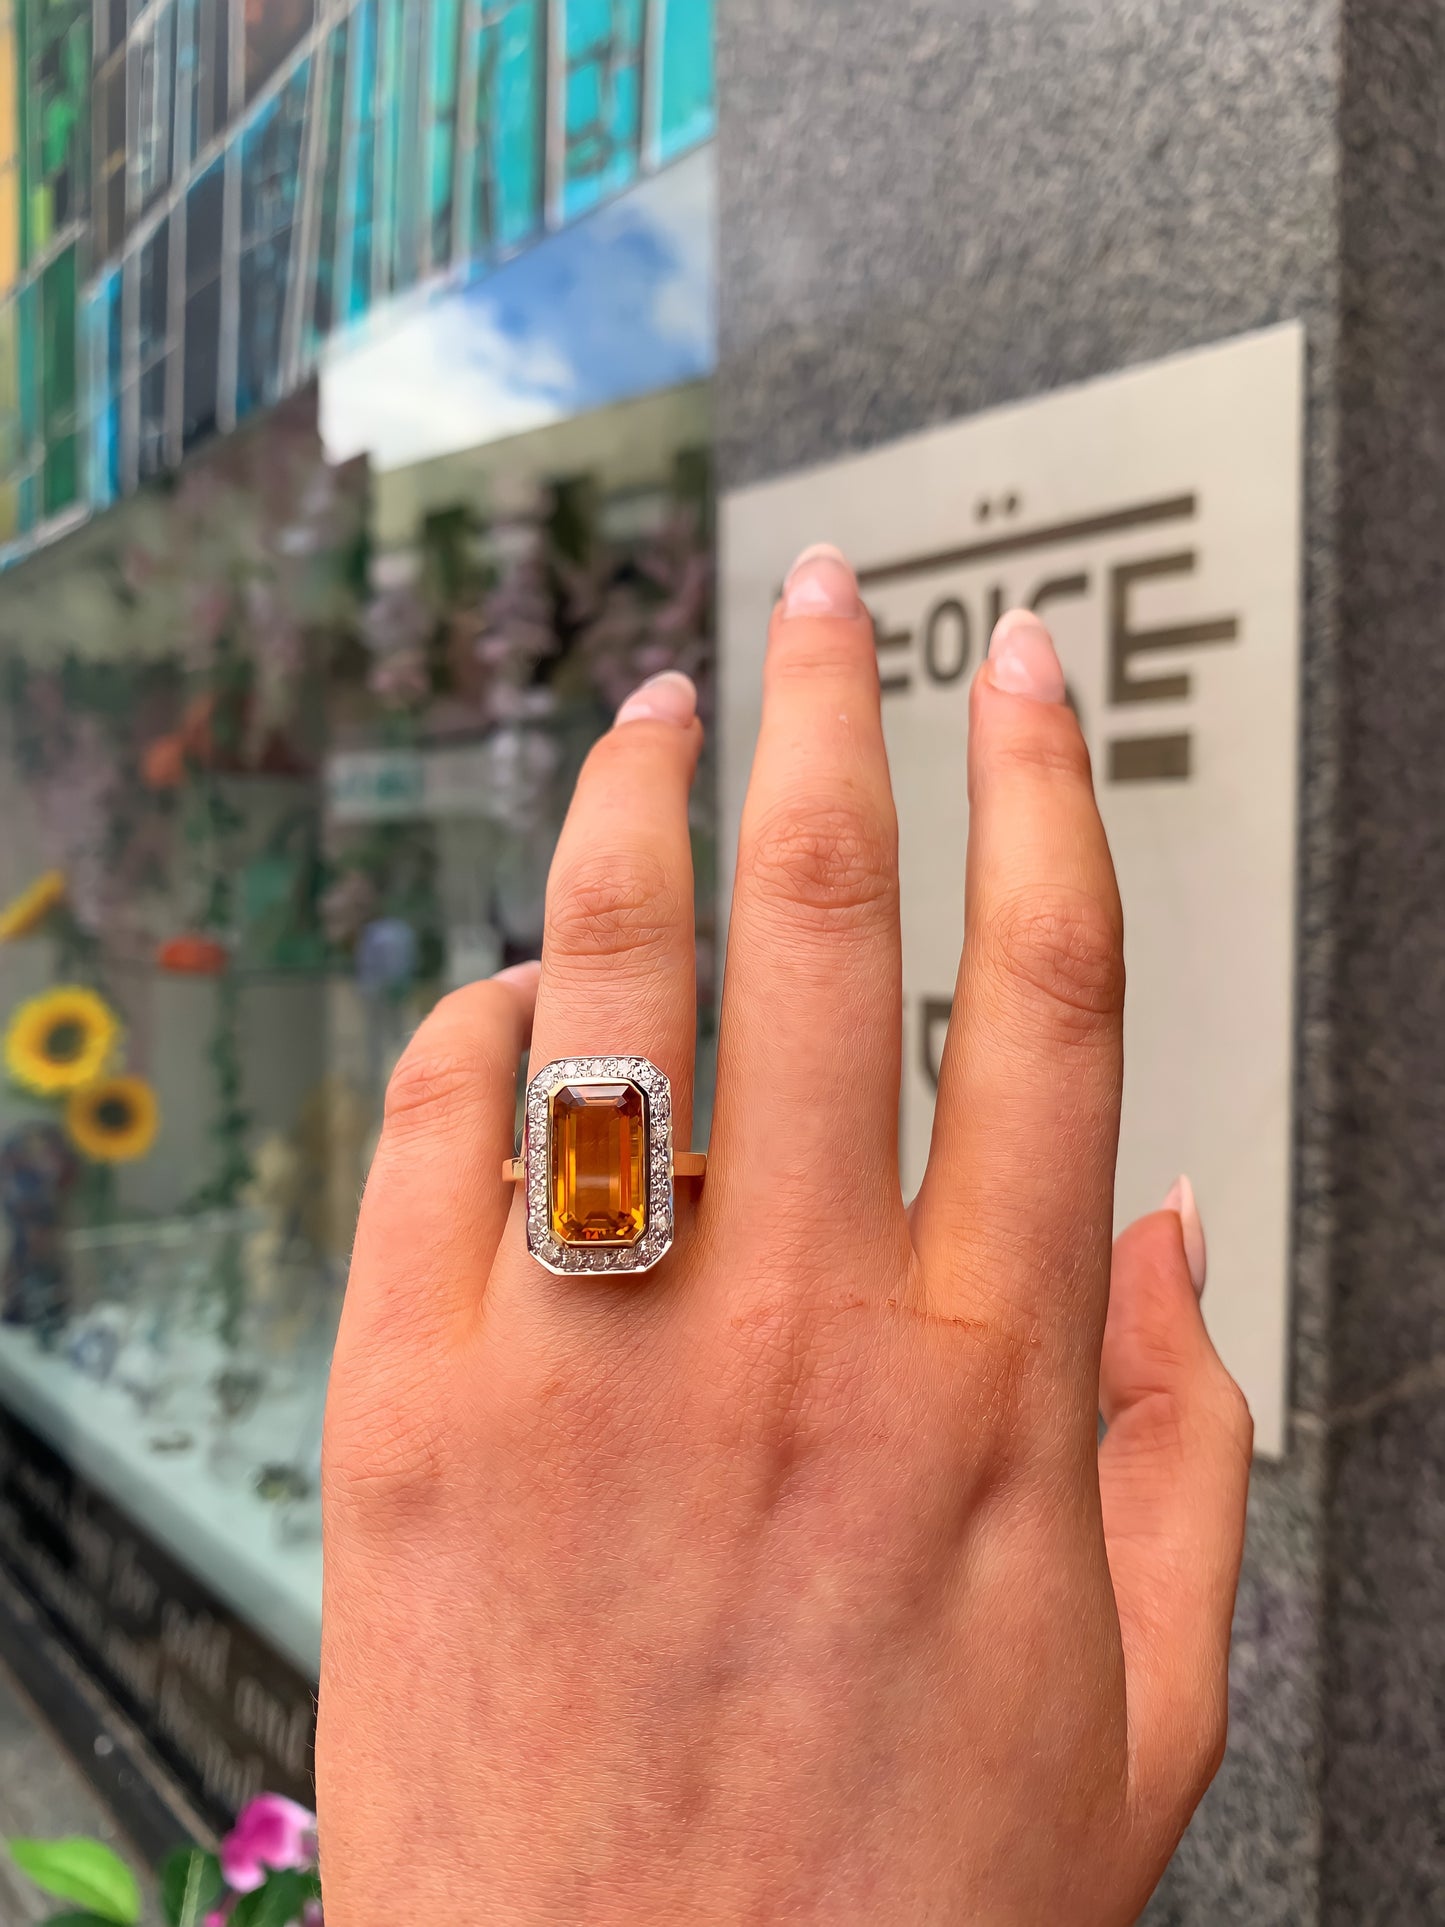 9ct Yellow Gold Madeira Citrine and Diamond Halo Cocktail Ring - Size N 1/2